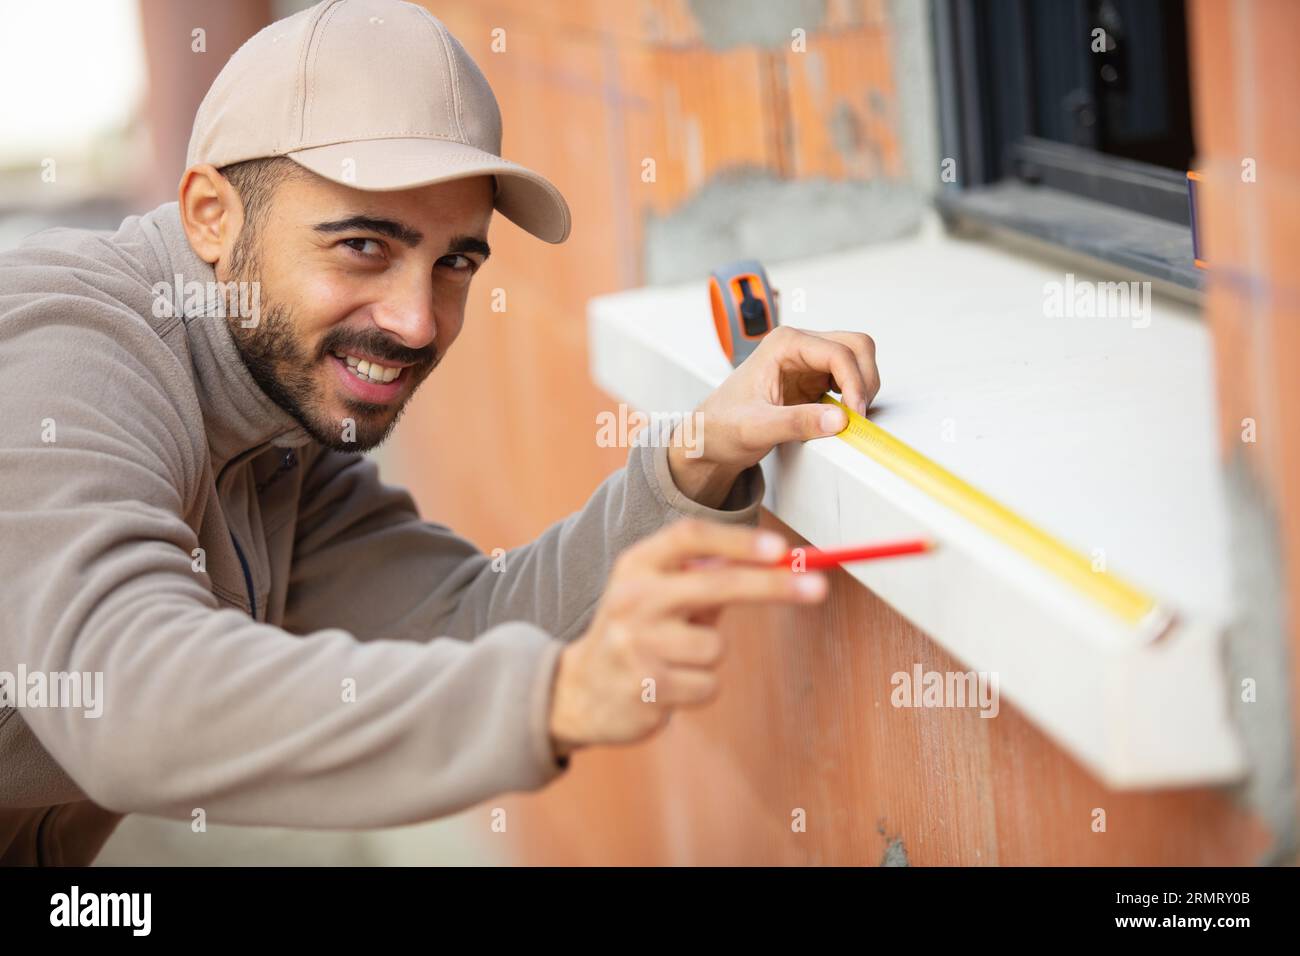 man in a blue shirt does window installation Stock Photo